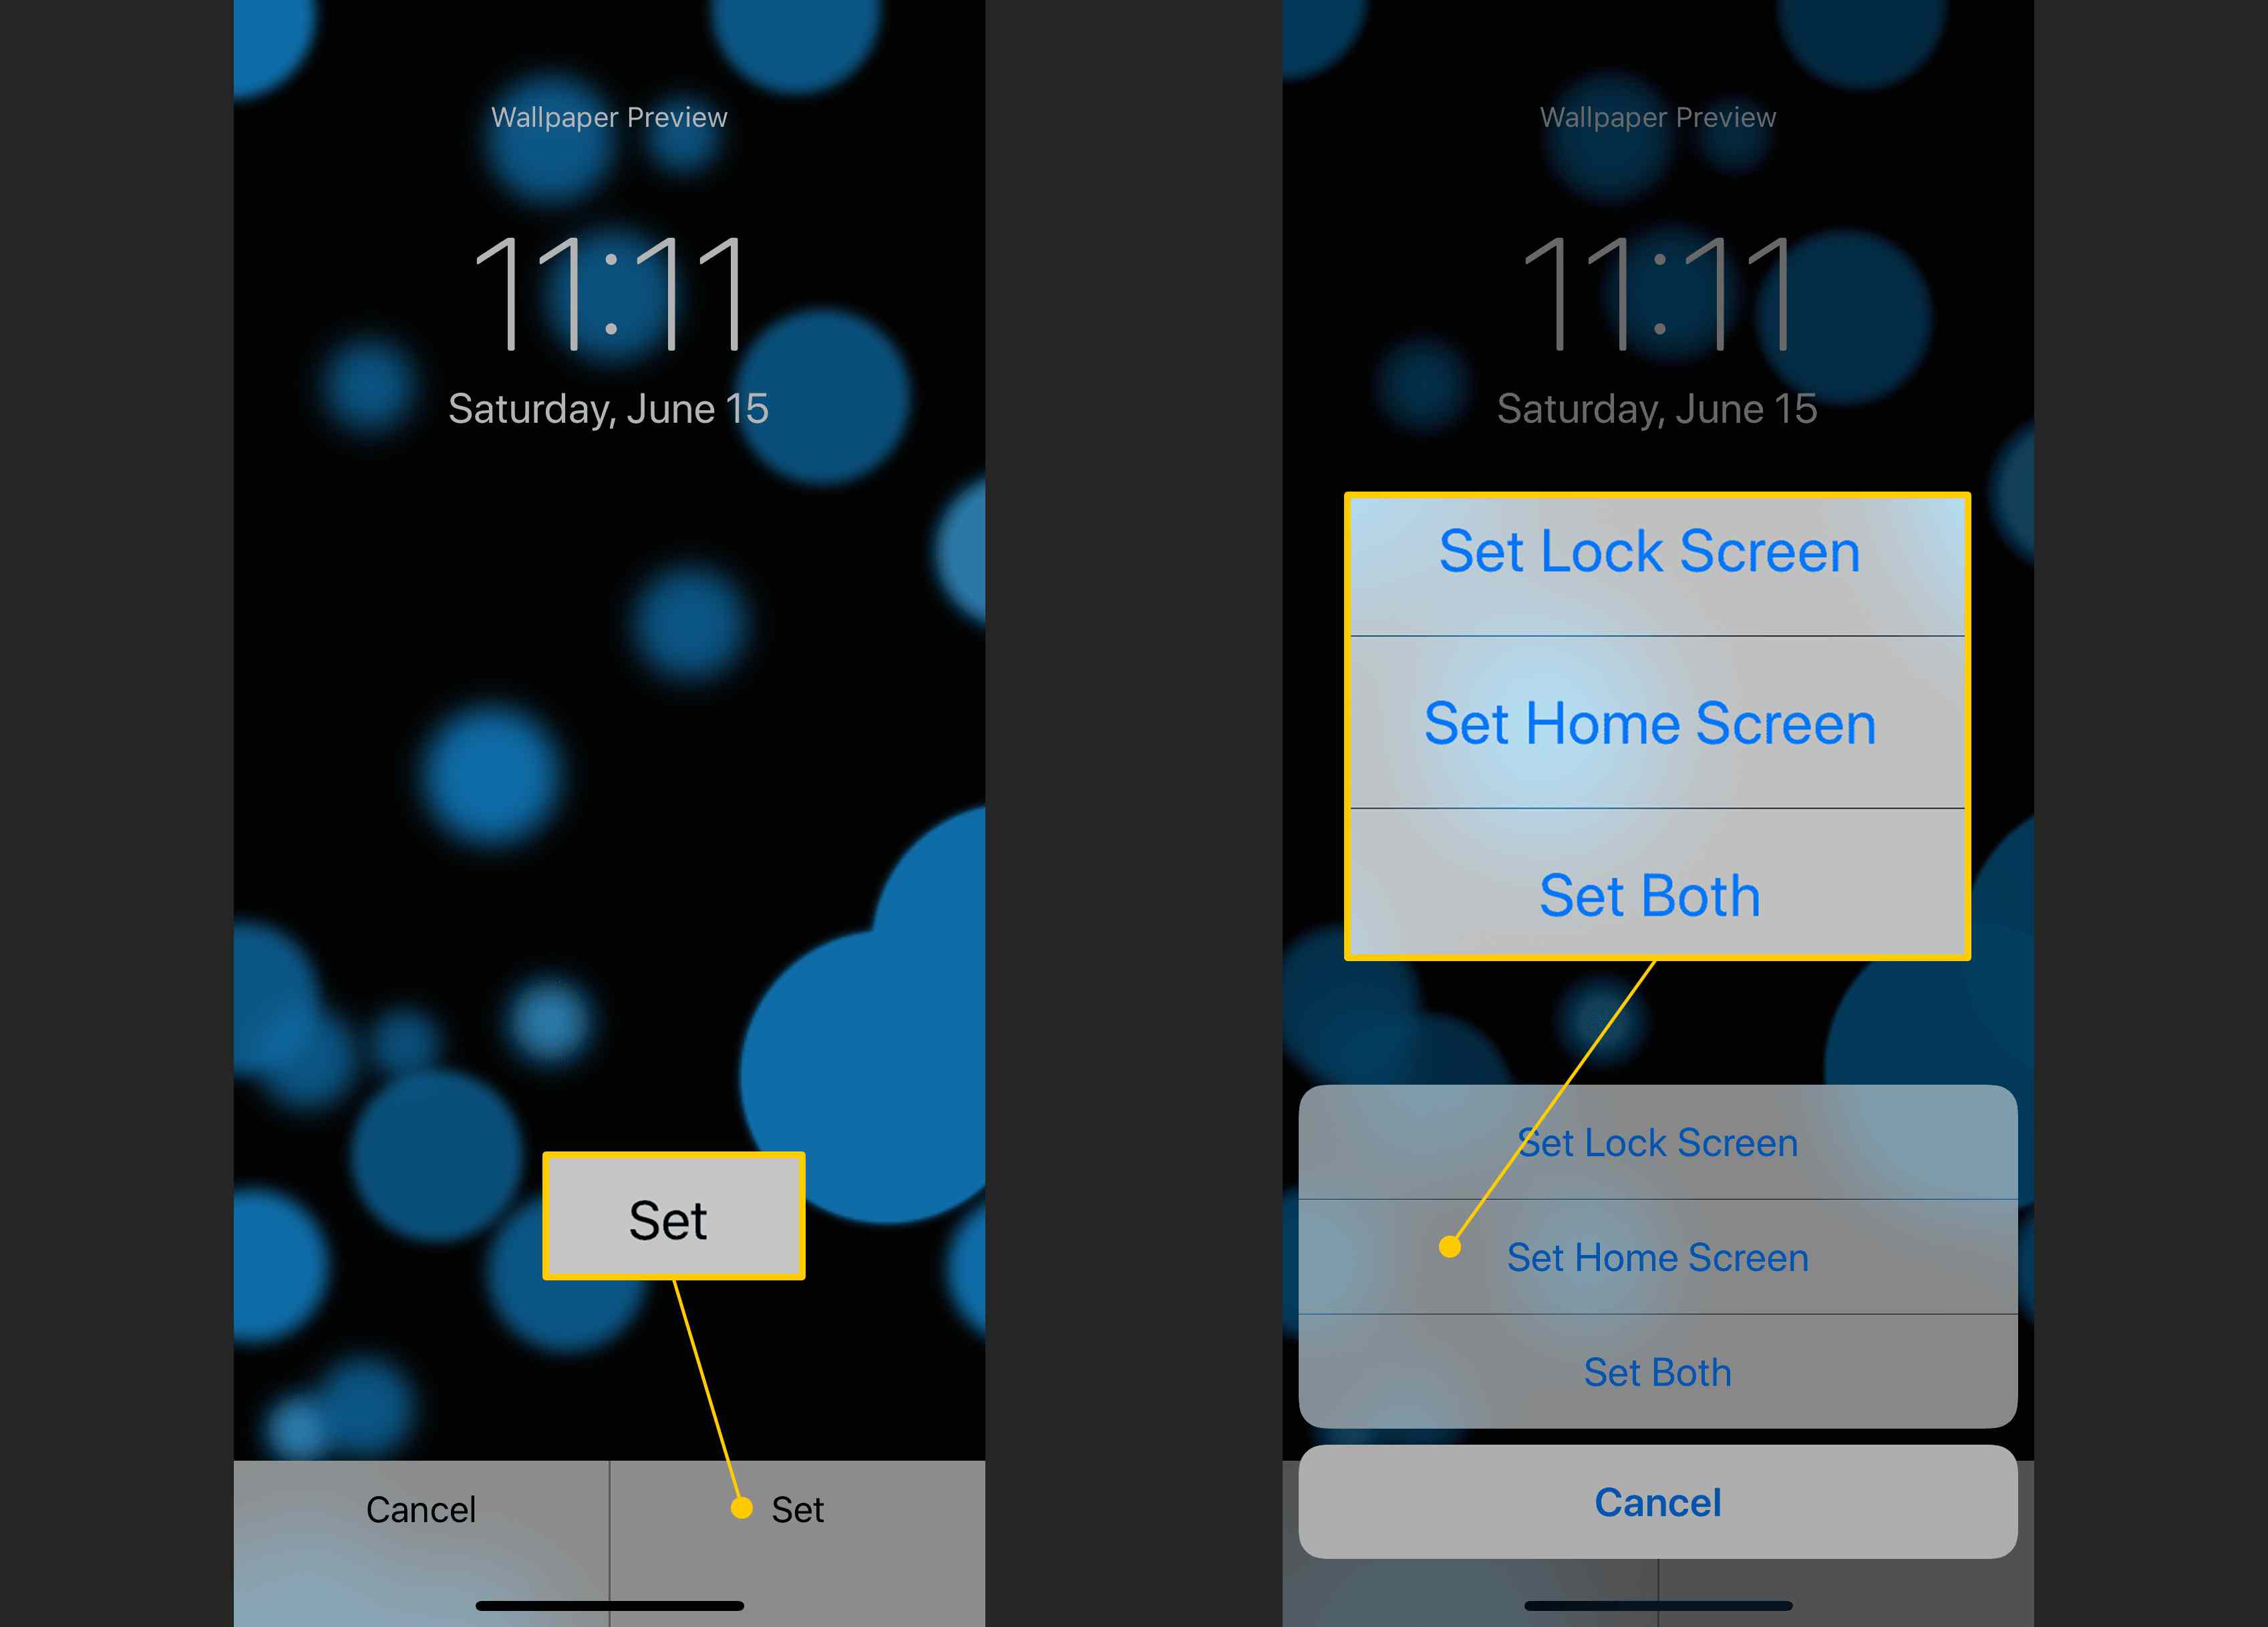 How to Change the Wallpaper on your iPhone